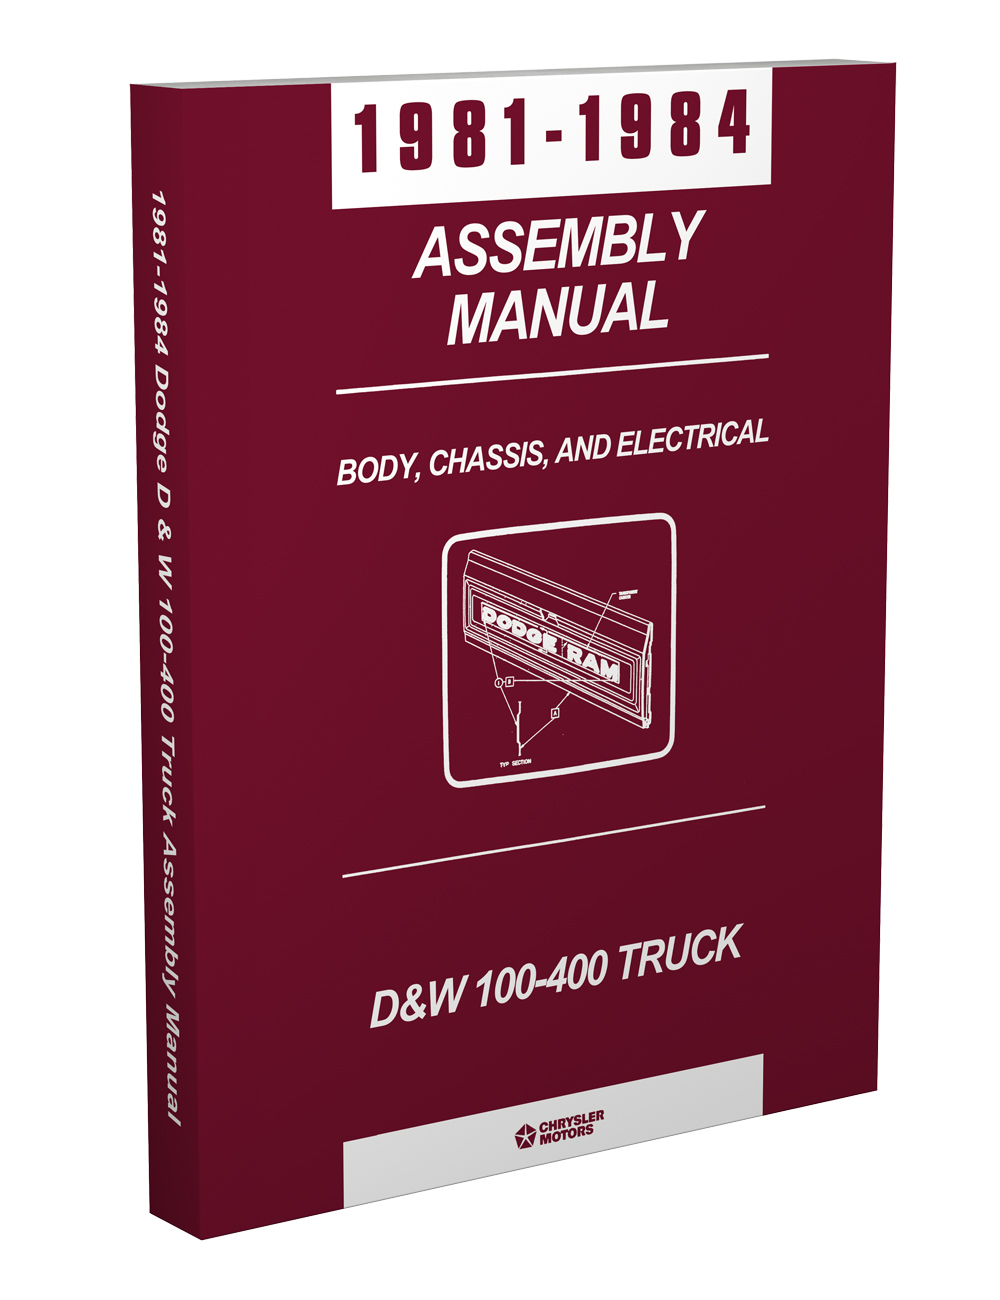 1981-1984 Dodge Truck Body, Chassis & Electrical Assembly Manual Reprint